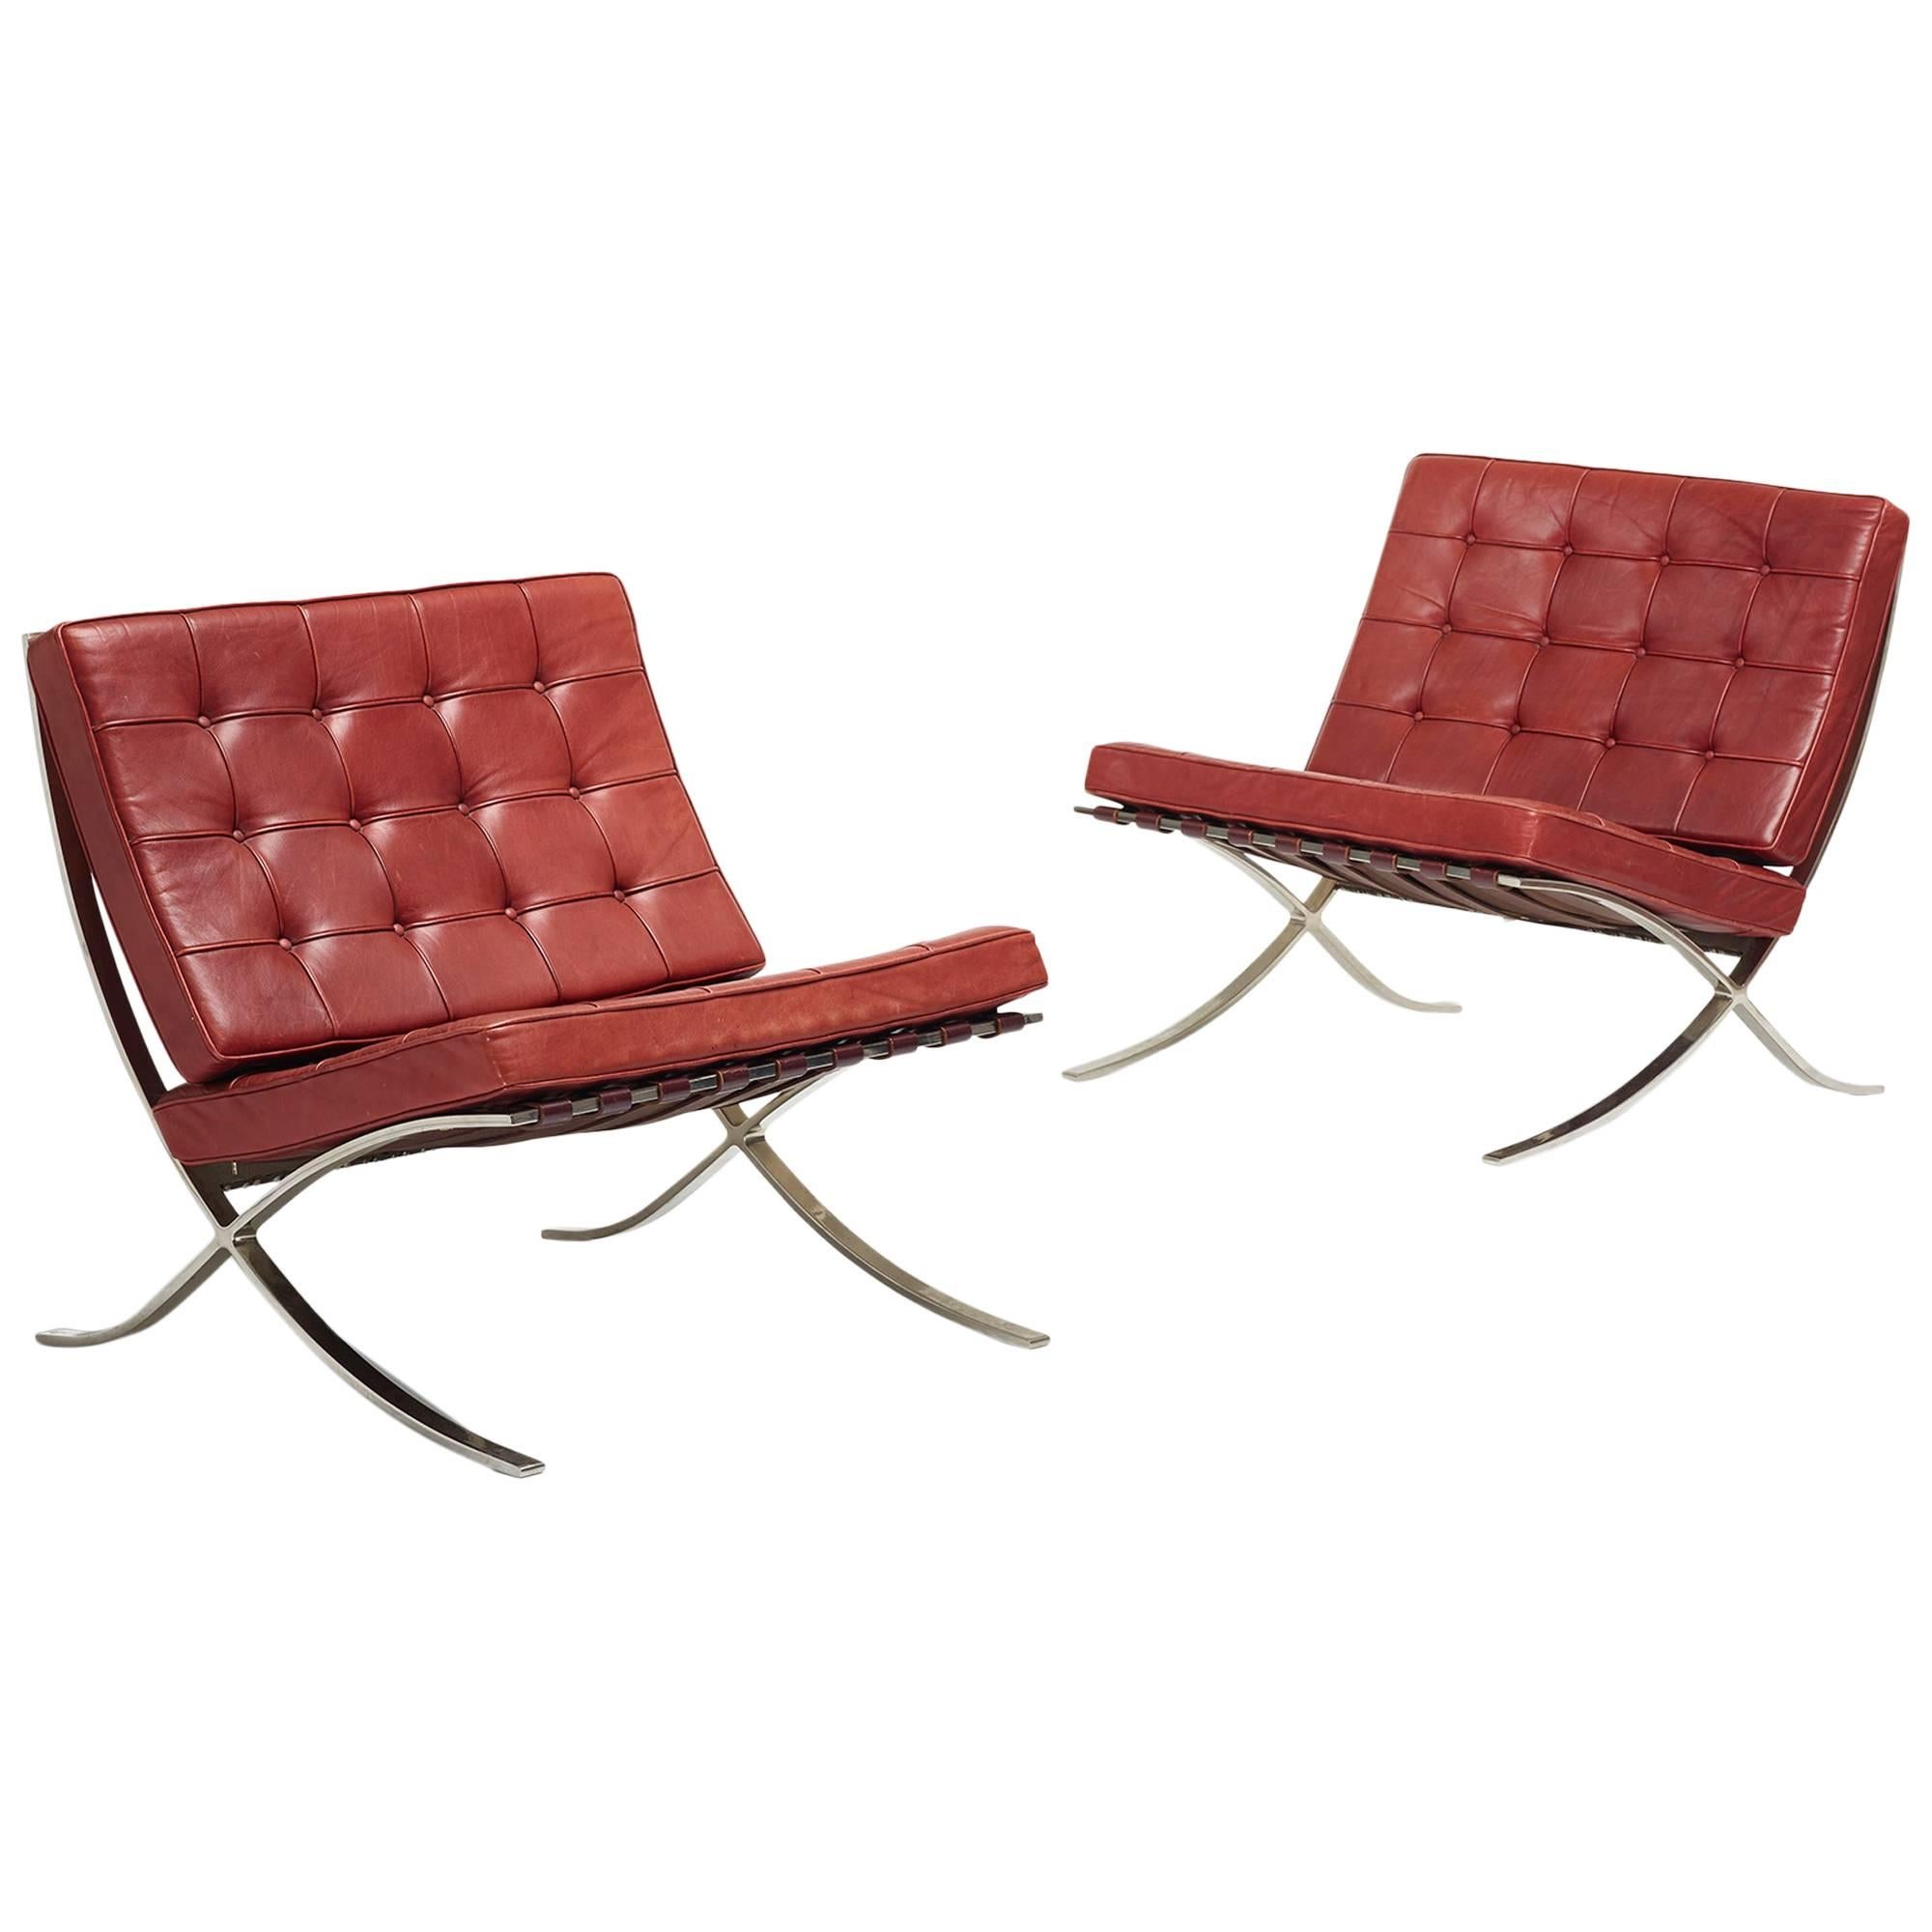 Pair of Barcelona Chairs by Ludwig Mies van der Rohe for Knoll International For Sale